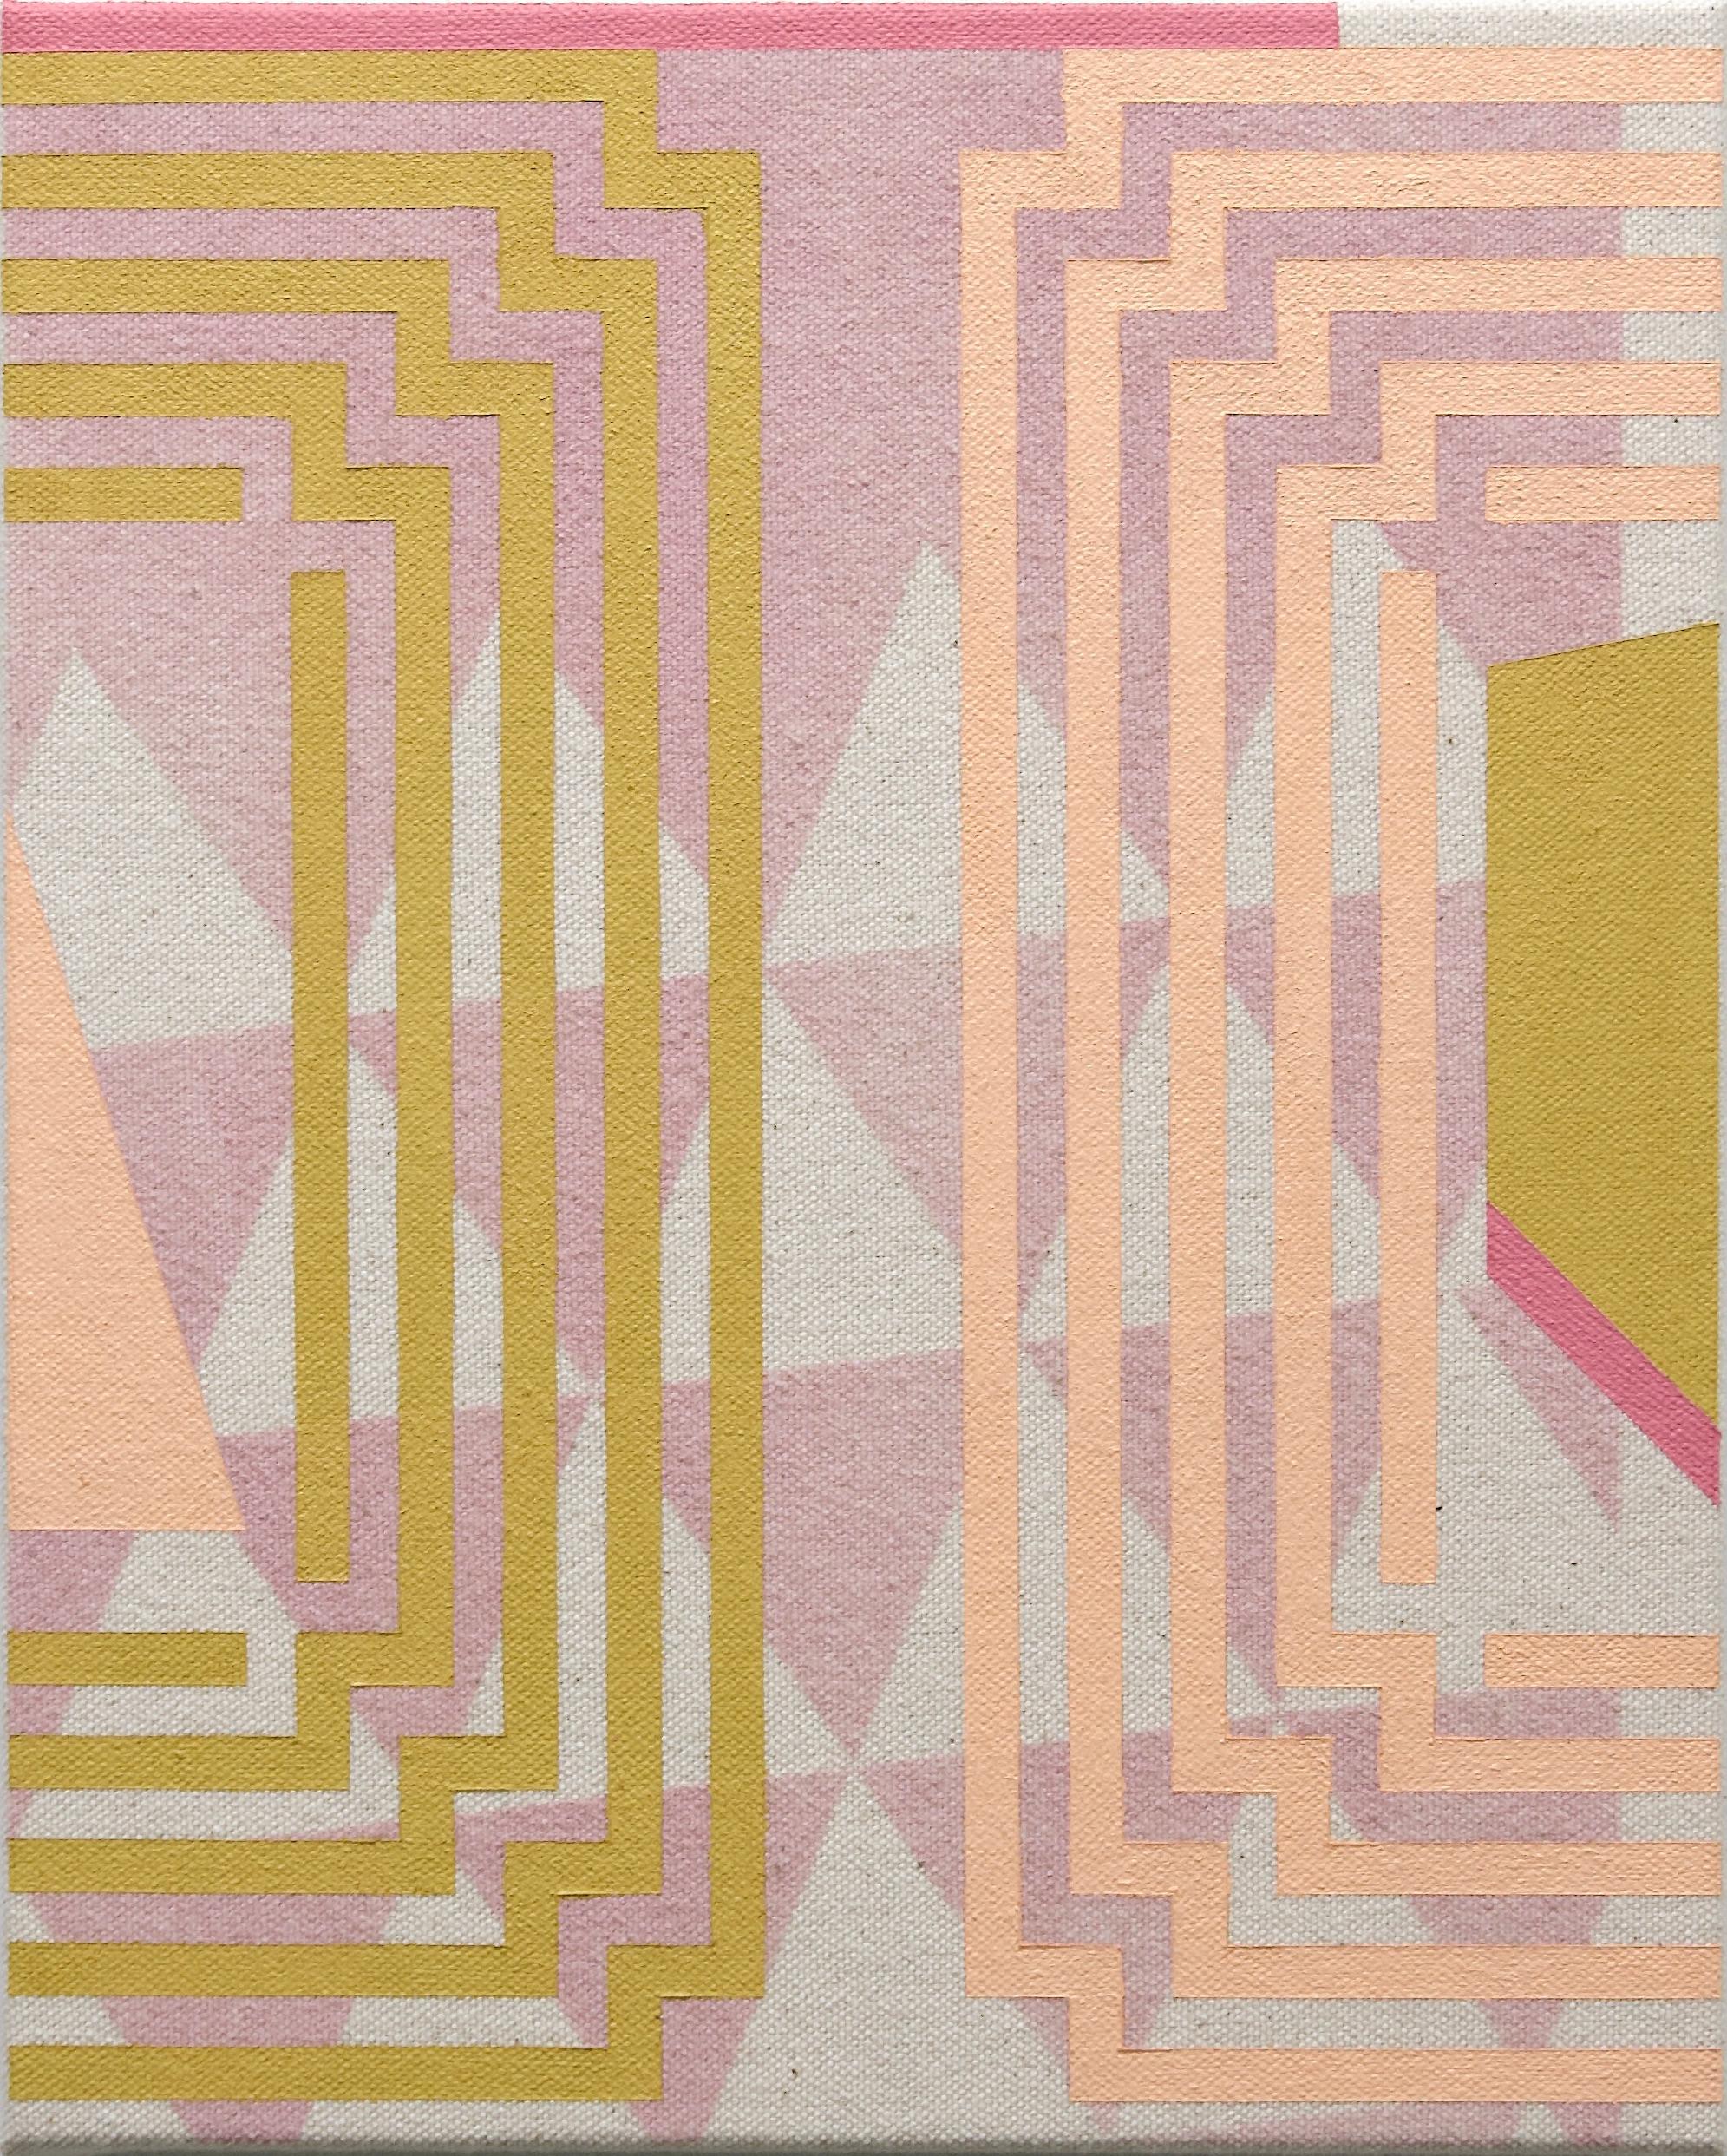 EMBRACING IMPERMANENCE - Abstract Geometric, Pink, Magenta Painting on Canvas 